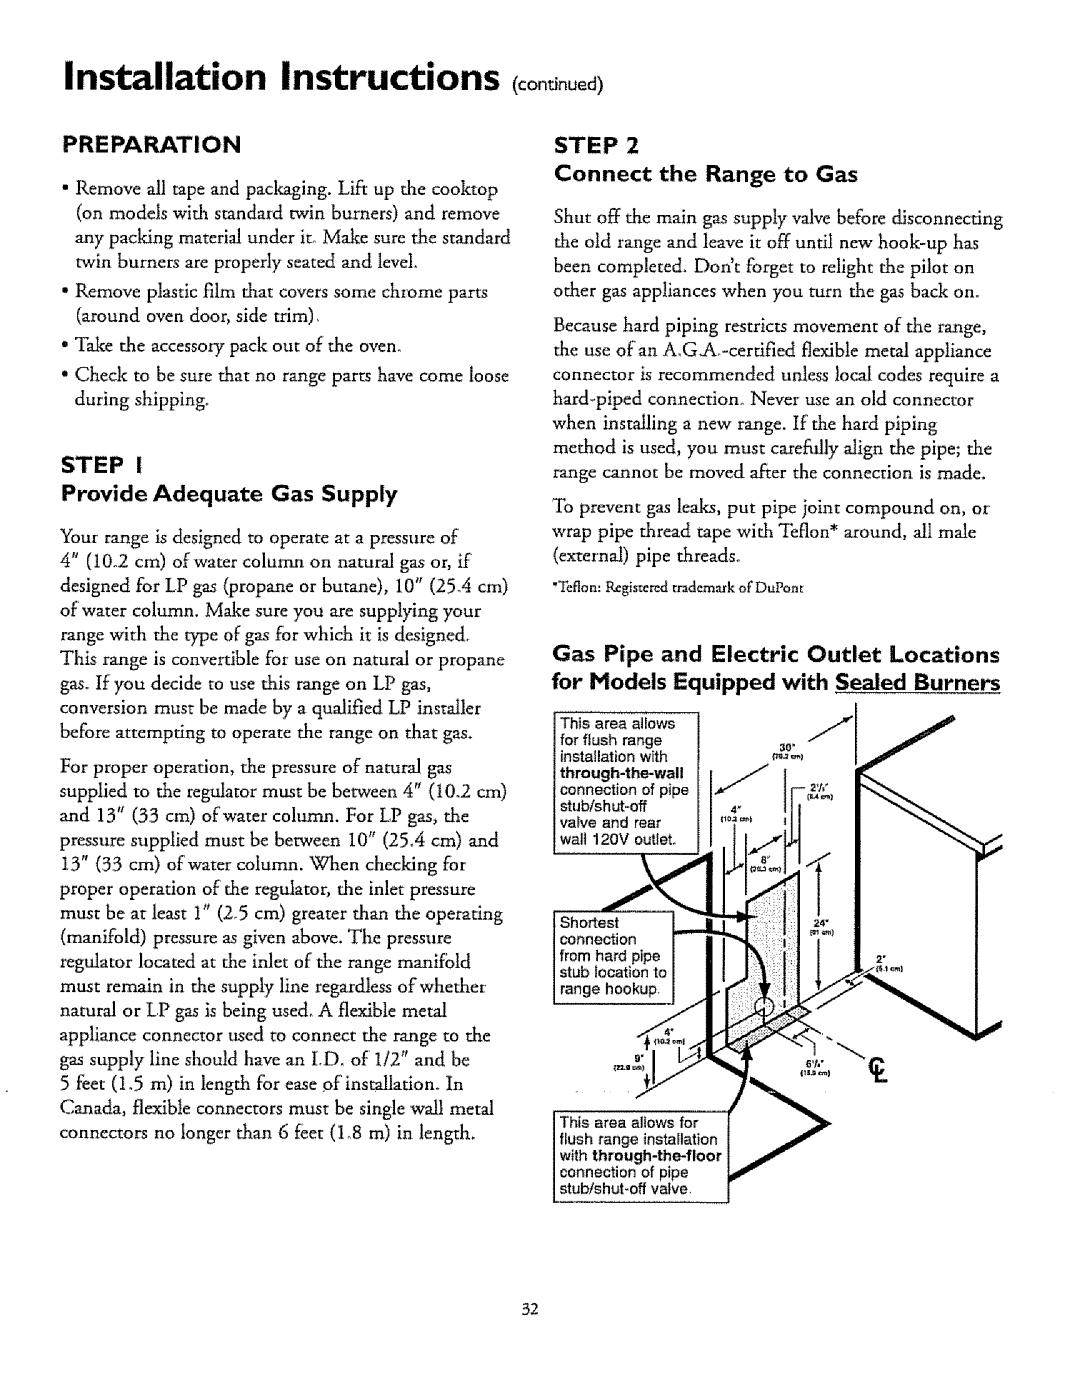 Sears 71351, 71751, 71068, 71168, 71161 Installation Instructions on oood, Preparation, STEP Provide Adequate Gas Supply 